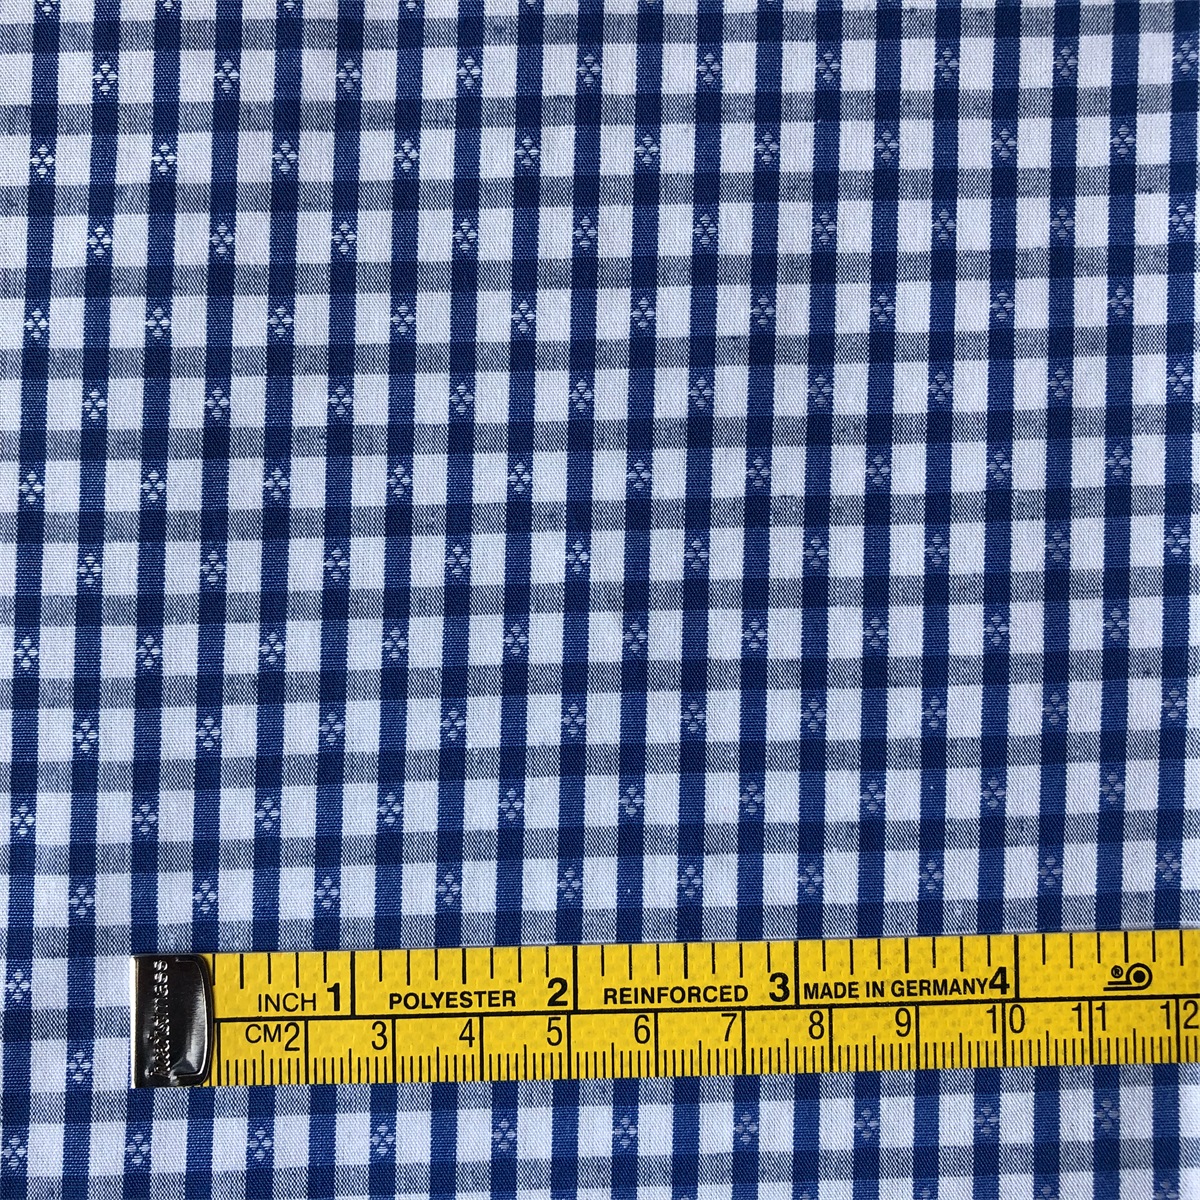 Cotton Yarn Dyed Fabric by compact yarn 100% cotton yarn dyed plaid dobby jacquard shirts woven fabric for men's casual shirts